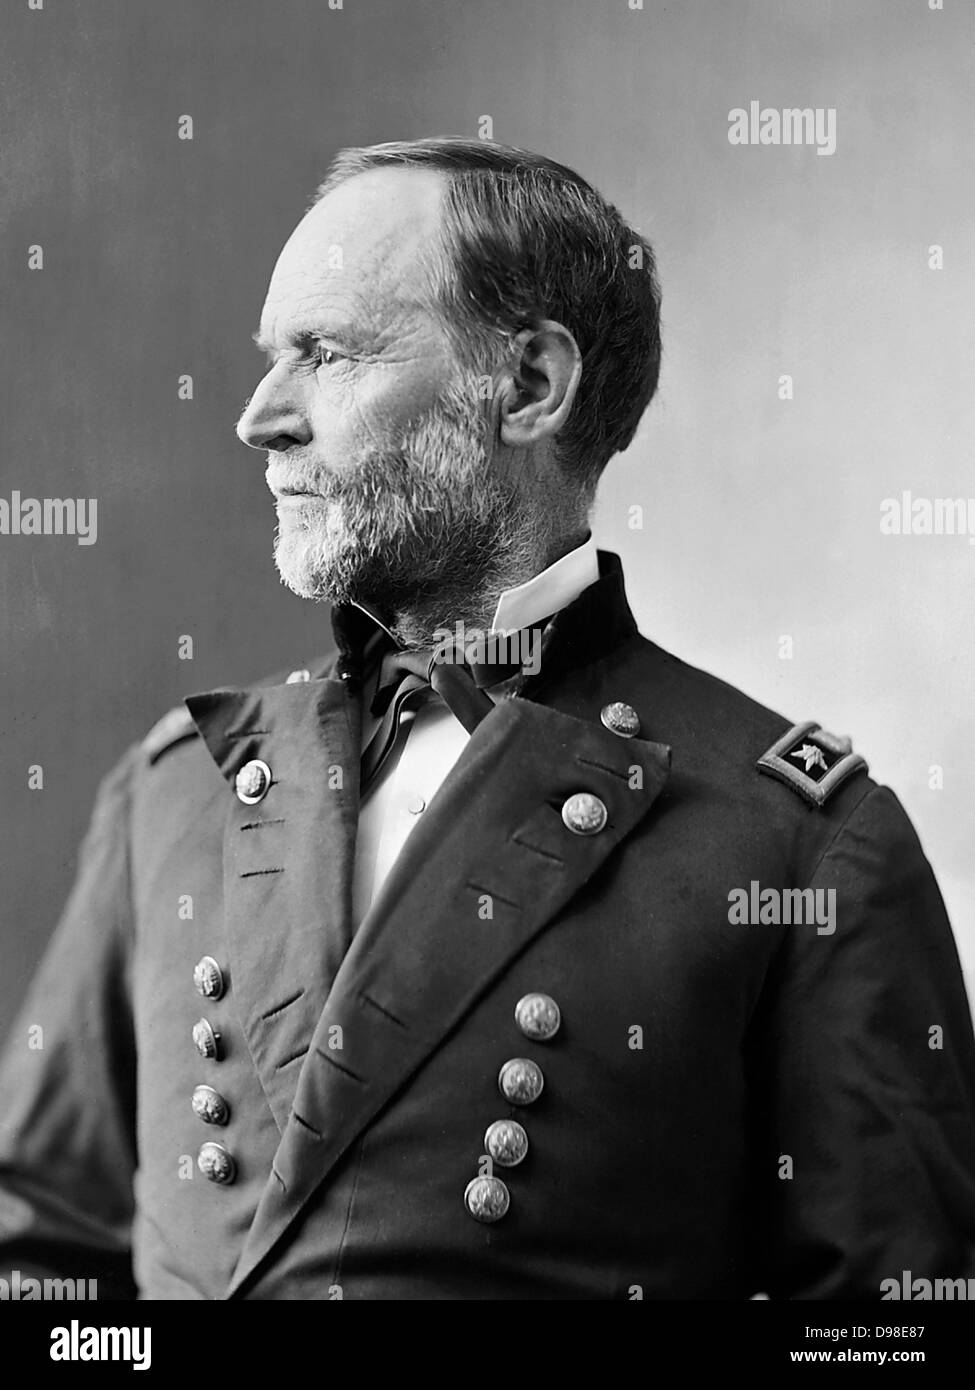 William Tecumseh Sherman (1820-1891) American soldier and businessman. During the American Civil War (1861-1865) he served as a General in the Union army. Outstanding strategist who conducted total war against the Confederate States. Stock Photo